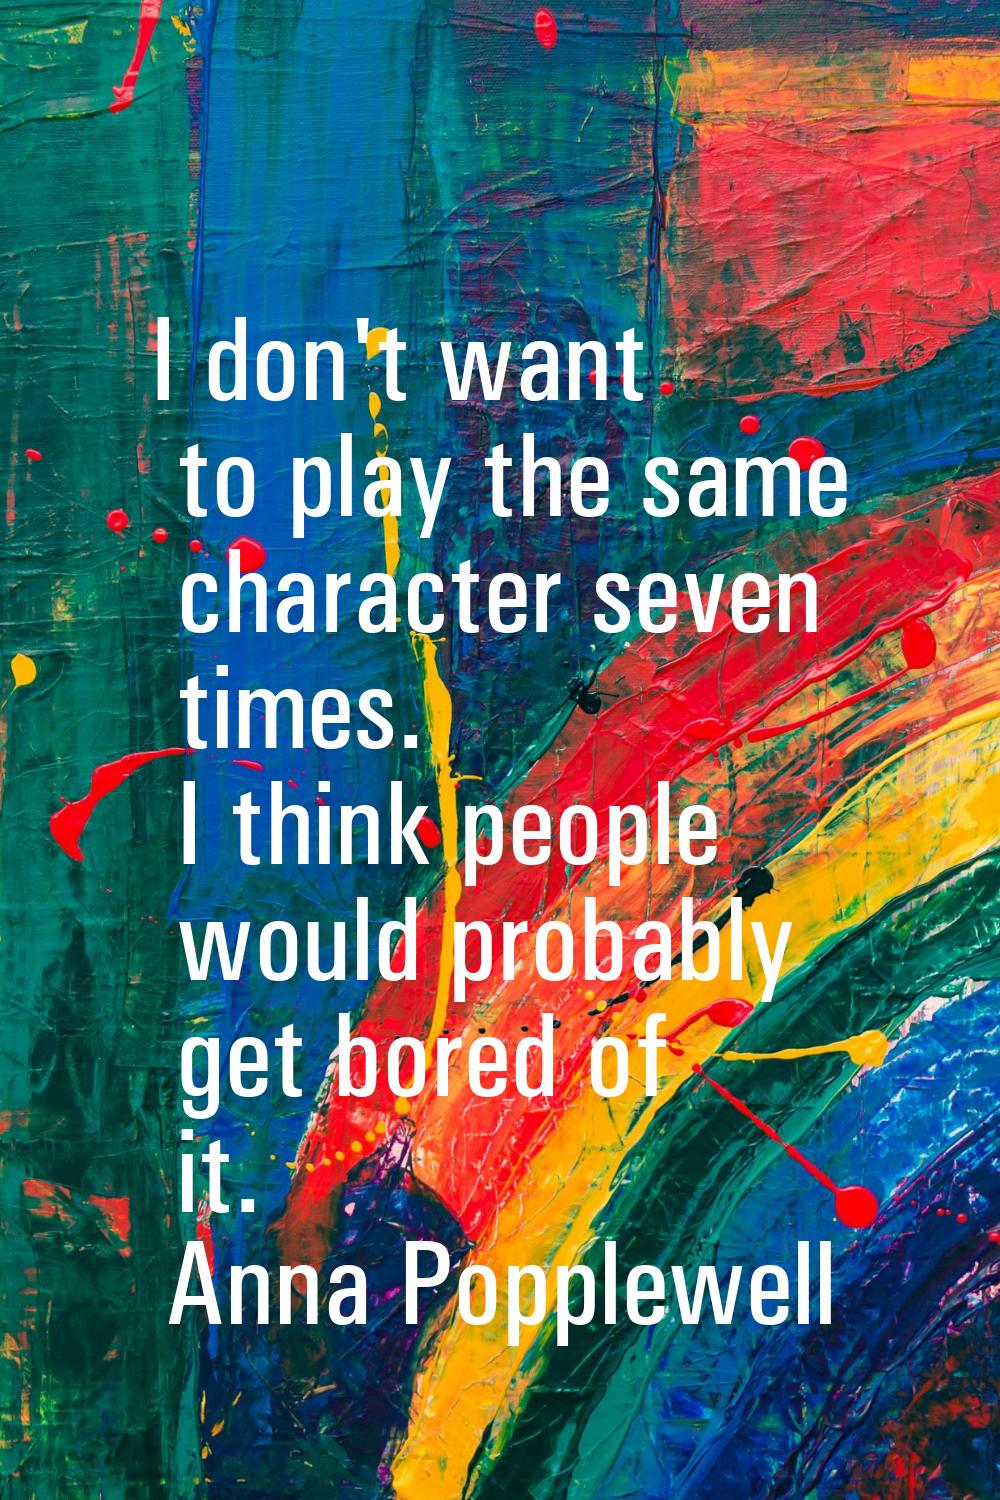 I don't want to play the same character seven times. I think people would probably get bored of it.